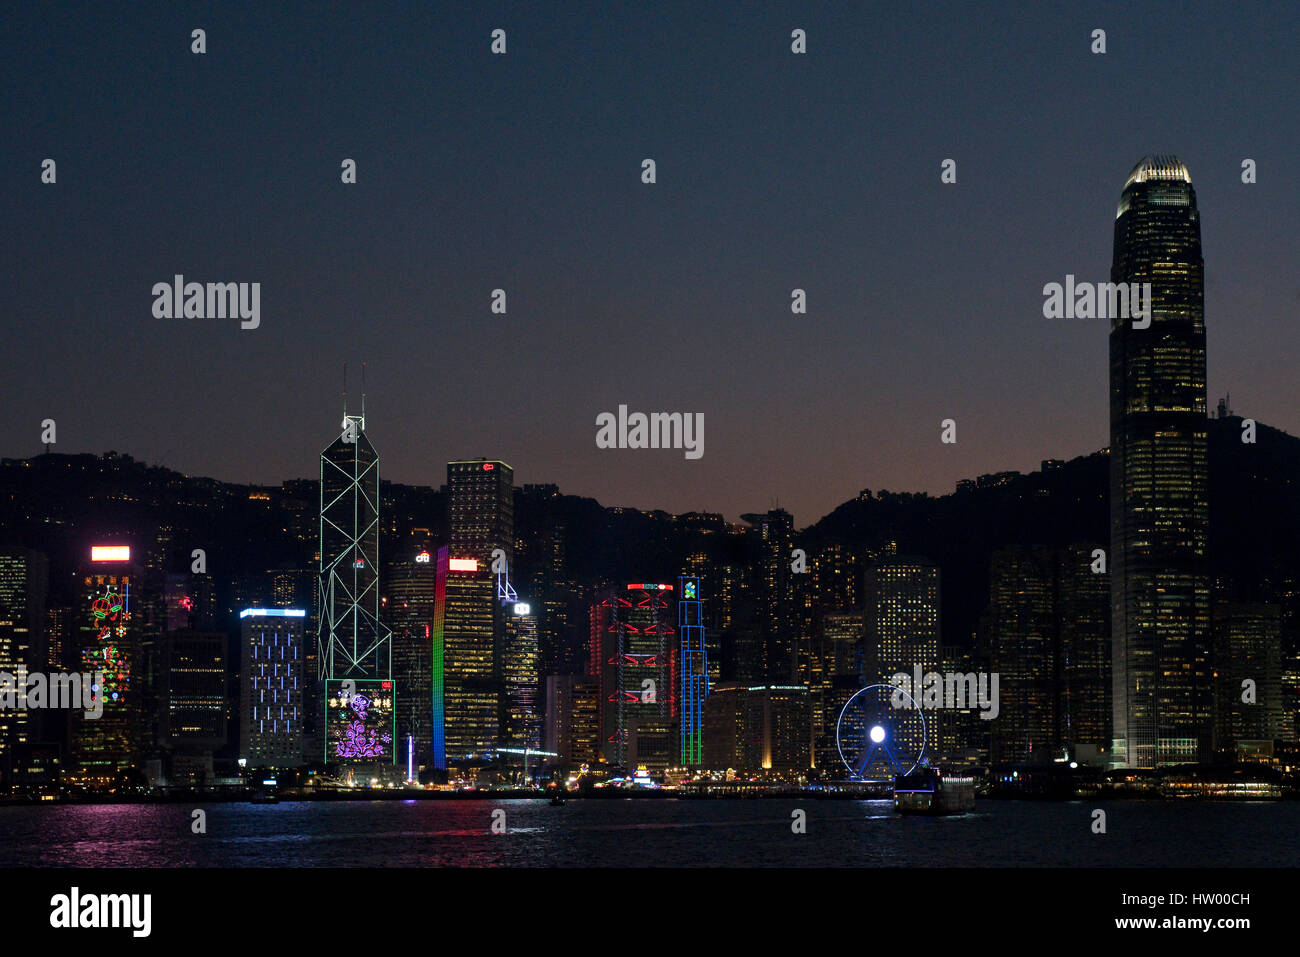 A colourful cityscape view of the buildings along Hong Kong Island from the Kowloon Public Pier at night. Stock Photo